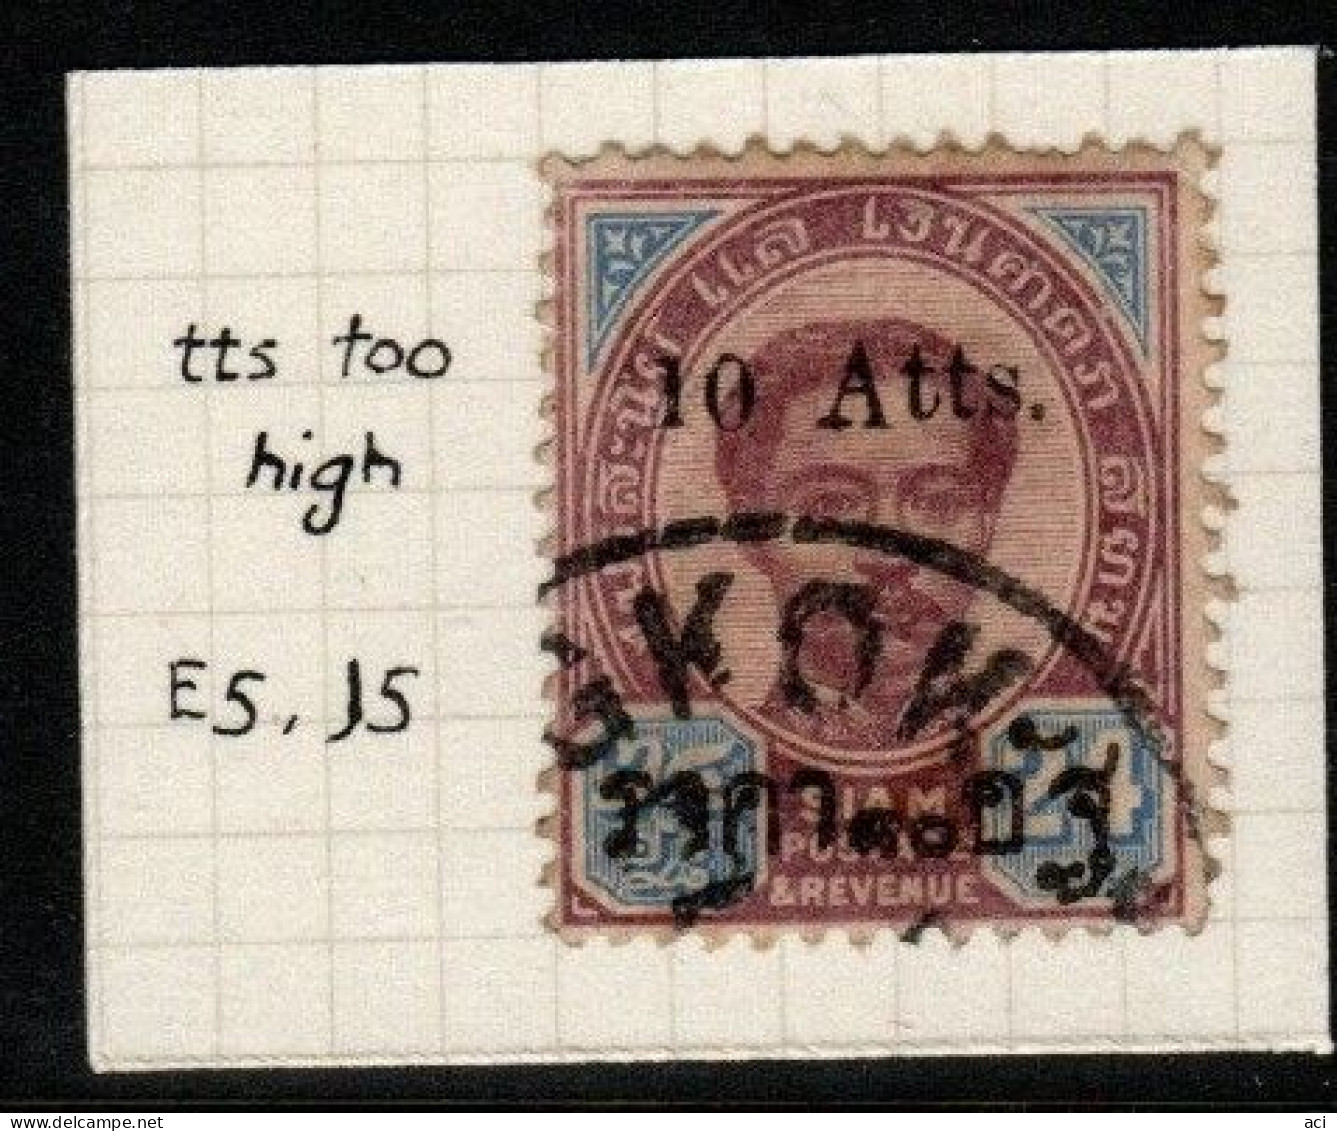 Thailand 1895 Provisional Issue  10Atts On 24 Atts  Tts Too High Variety,used, - Thailand